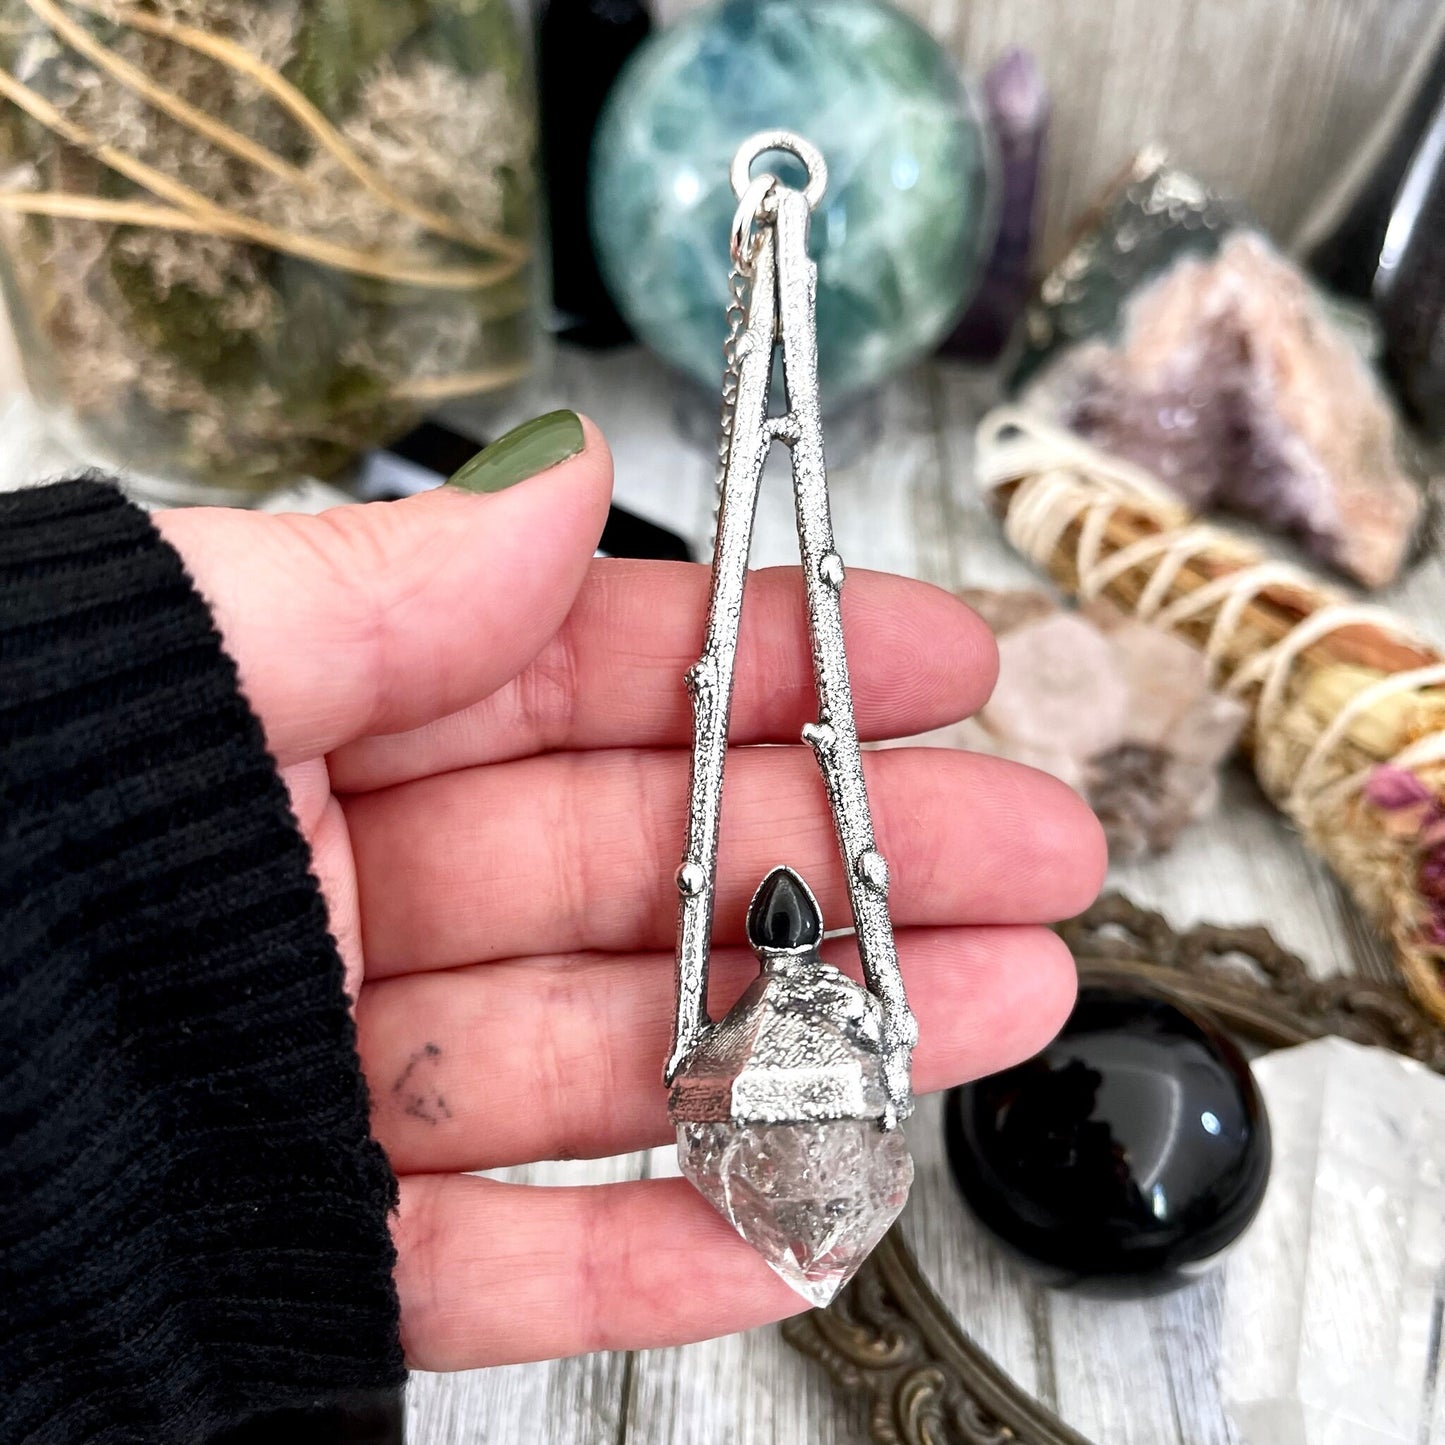 big crystal Necklace, Big Gothic Necklace, Bohemian Jewelry, Clear Quartz Pendent, Crystal Necklaces, Crystal Pendant, Etsy ID: 1650759626, FOXLARK- NECKLACES, Jewelry, nature inspired, Necklaces, Silver Jewelry, Silver Necklace, Silver Stone Jewelry, Sta